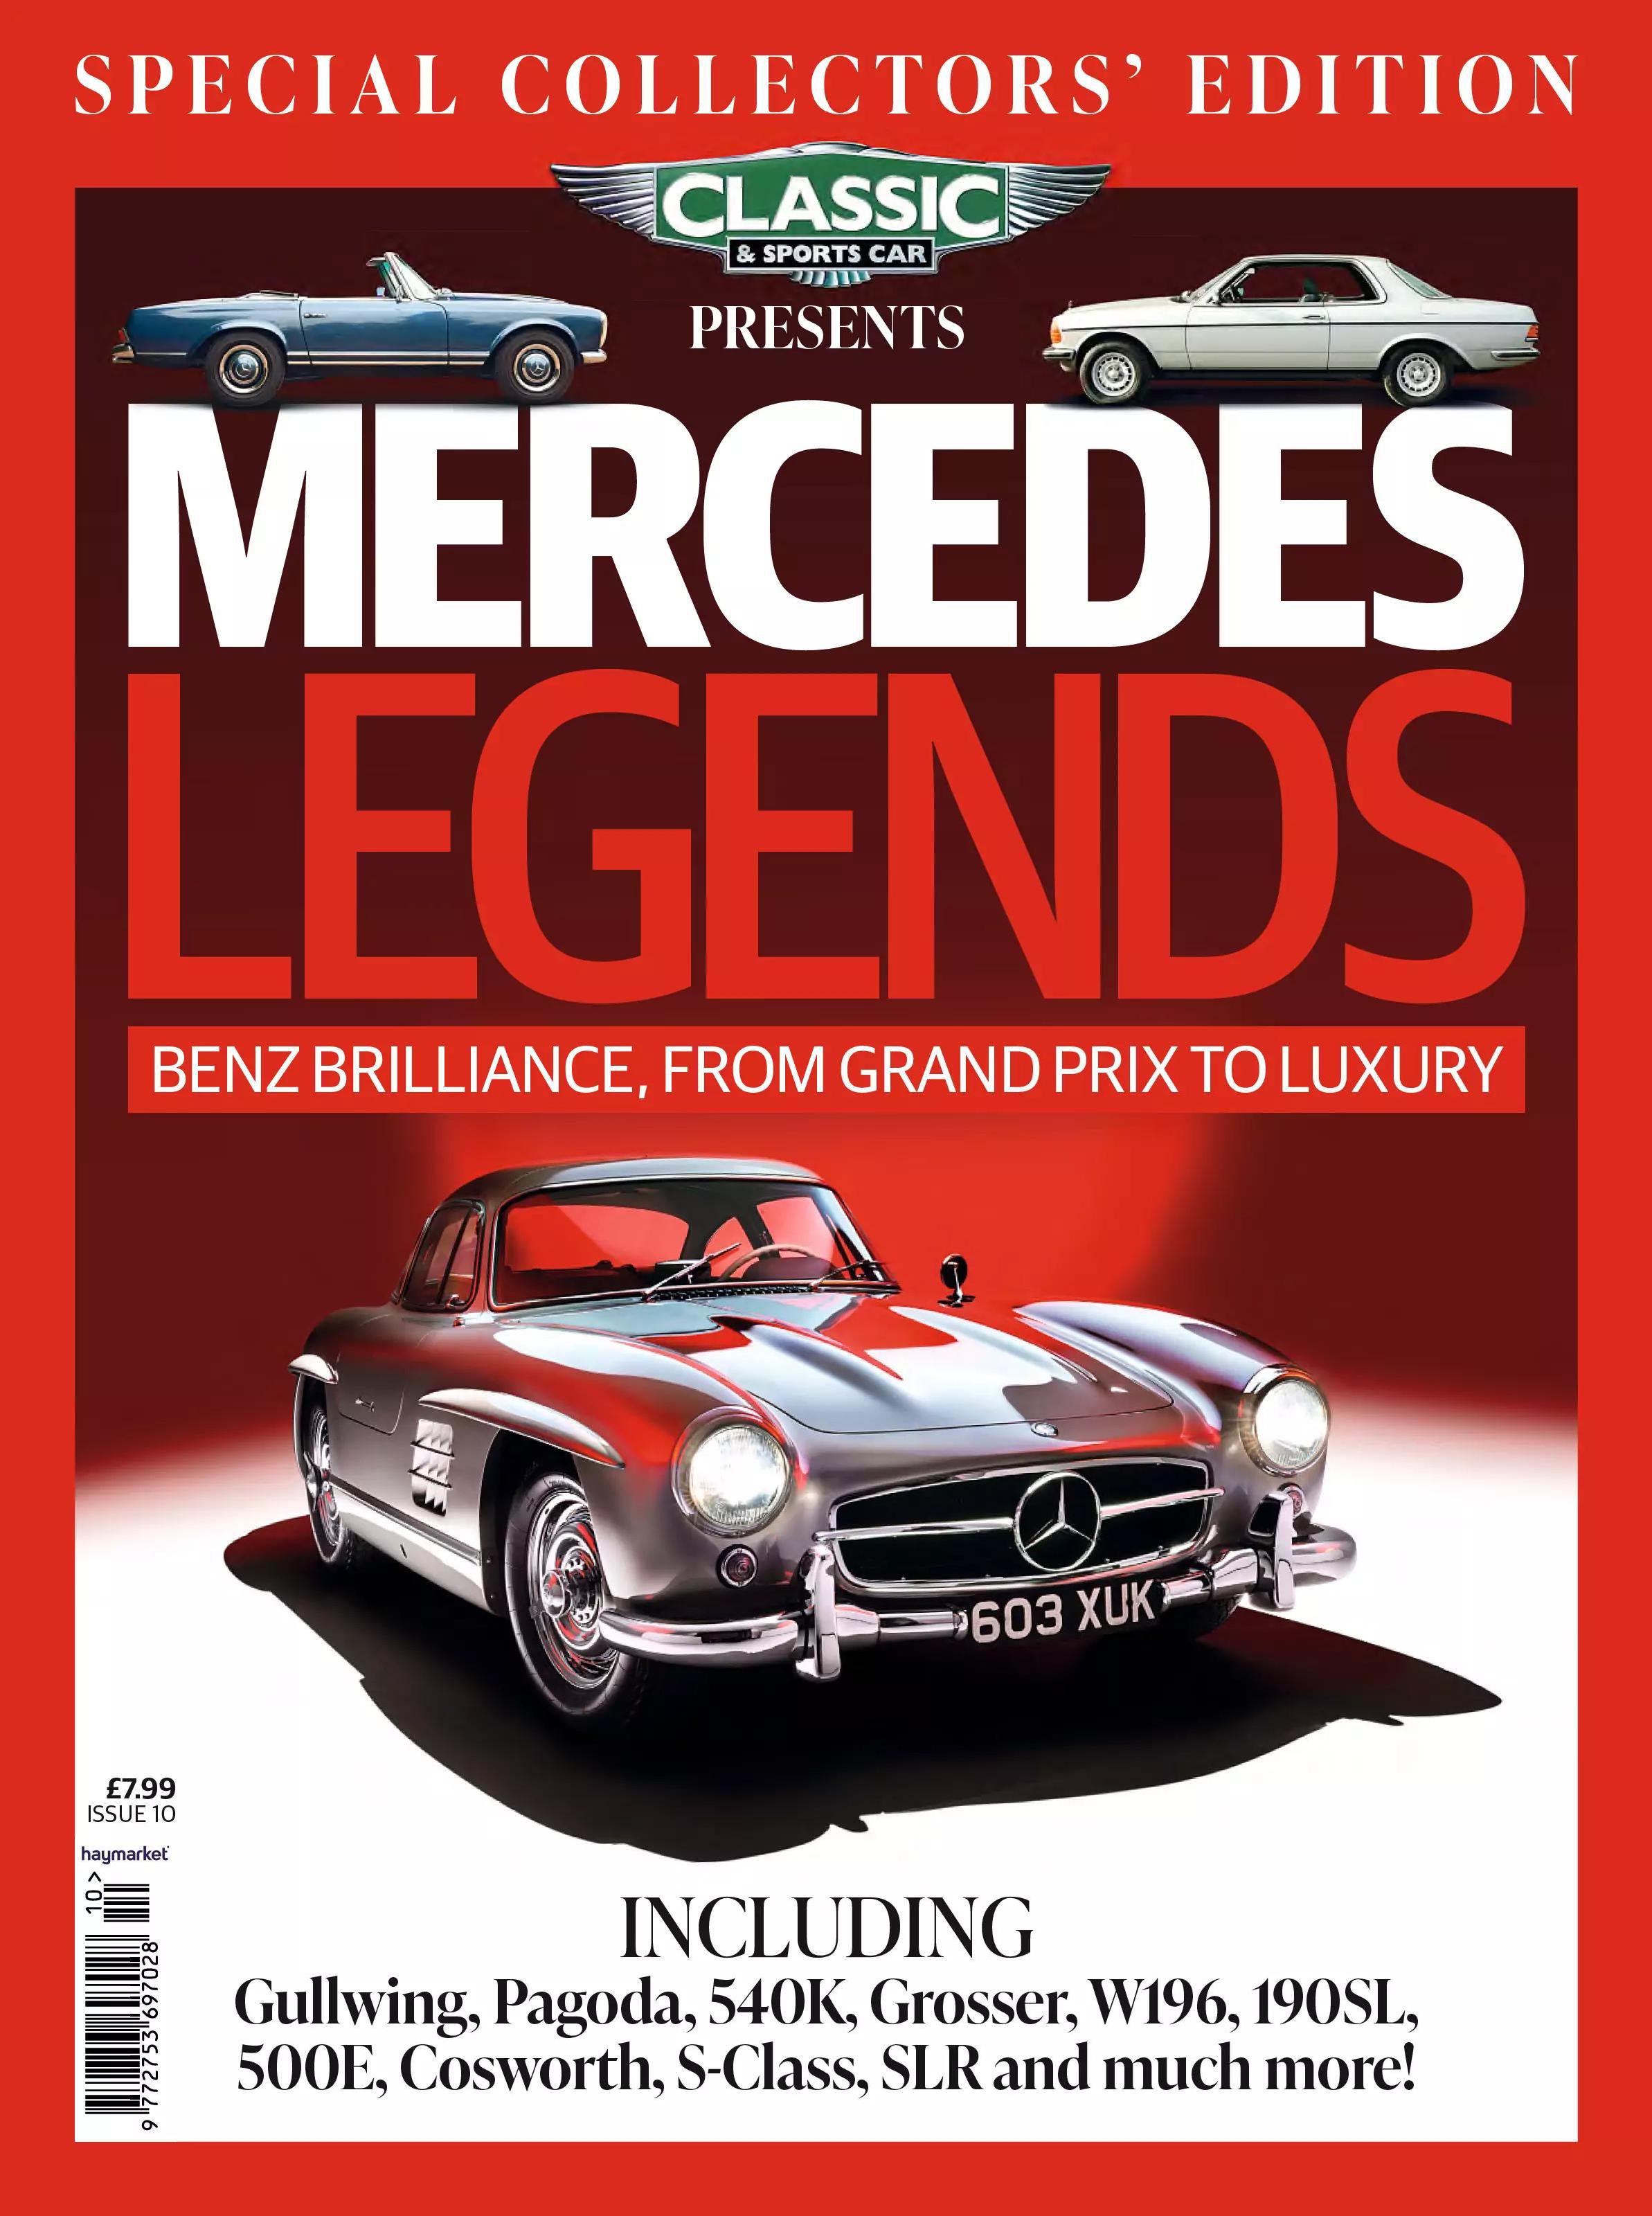 Журнал Sports Car legends(from the publishers of Classic Sports cars)